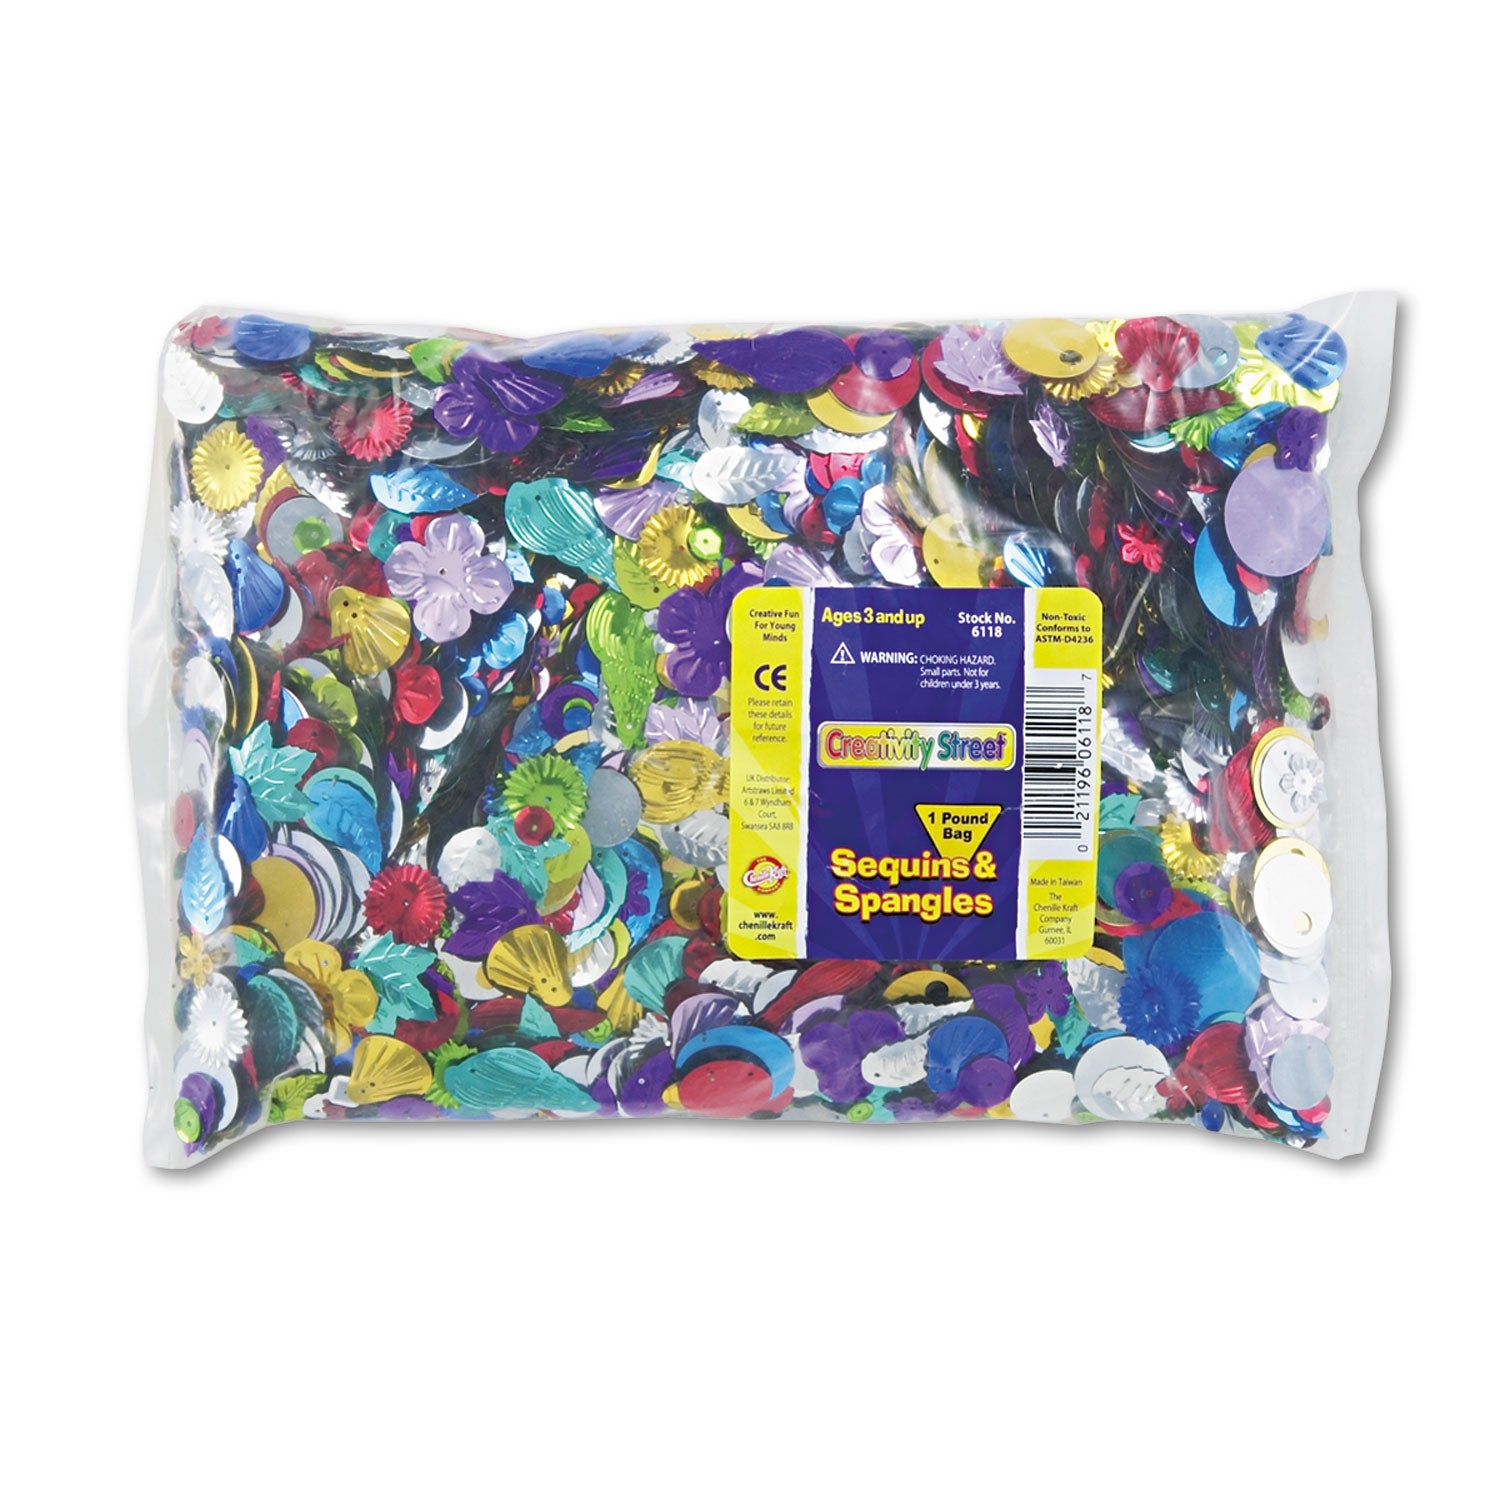 Sequins and Spangles Classroom Pack, Assorted Metallic Colors, 1 lb/Pack - 